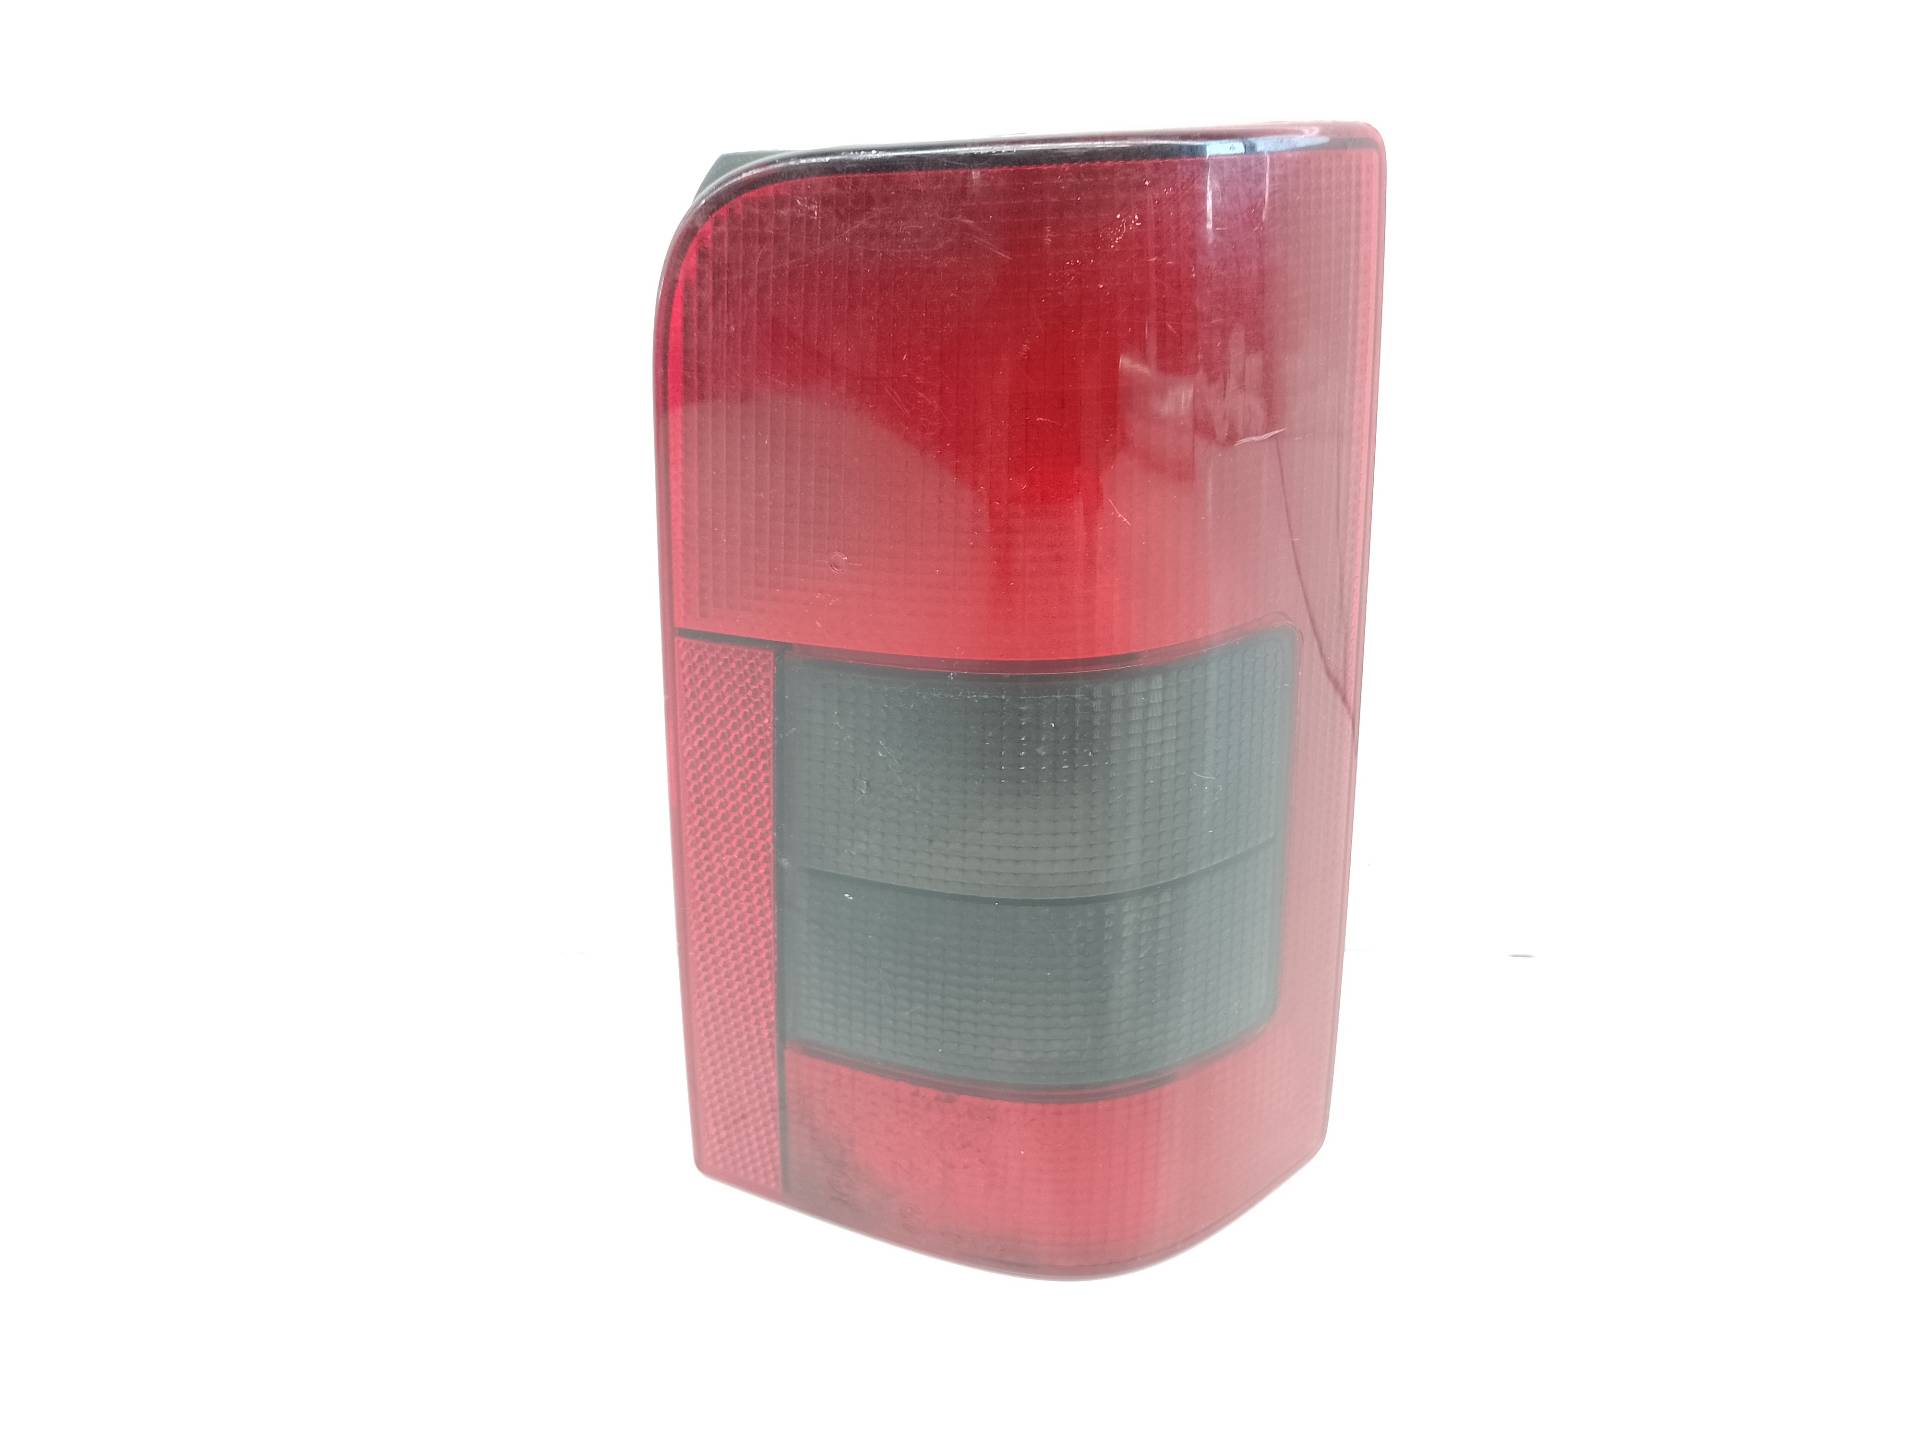 RENAULT Clio 1 generation (1990-1998) Rear Right Taillight Lamp 6351H2 25740651